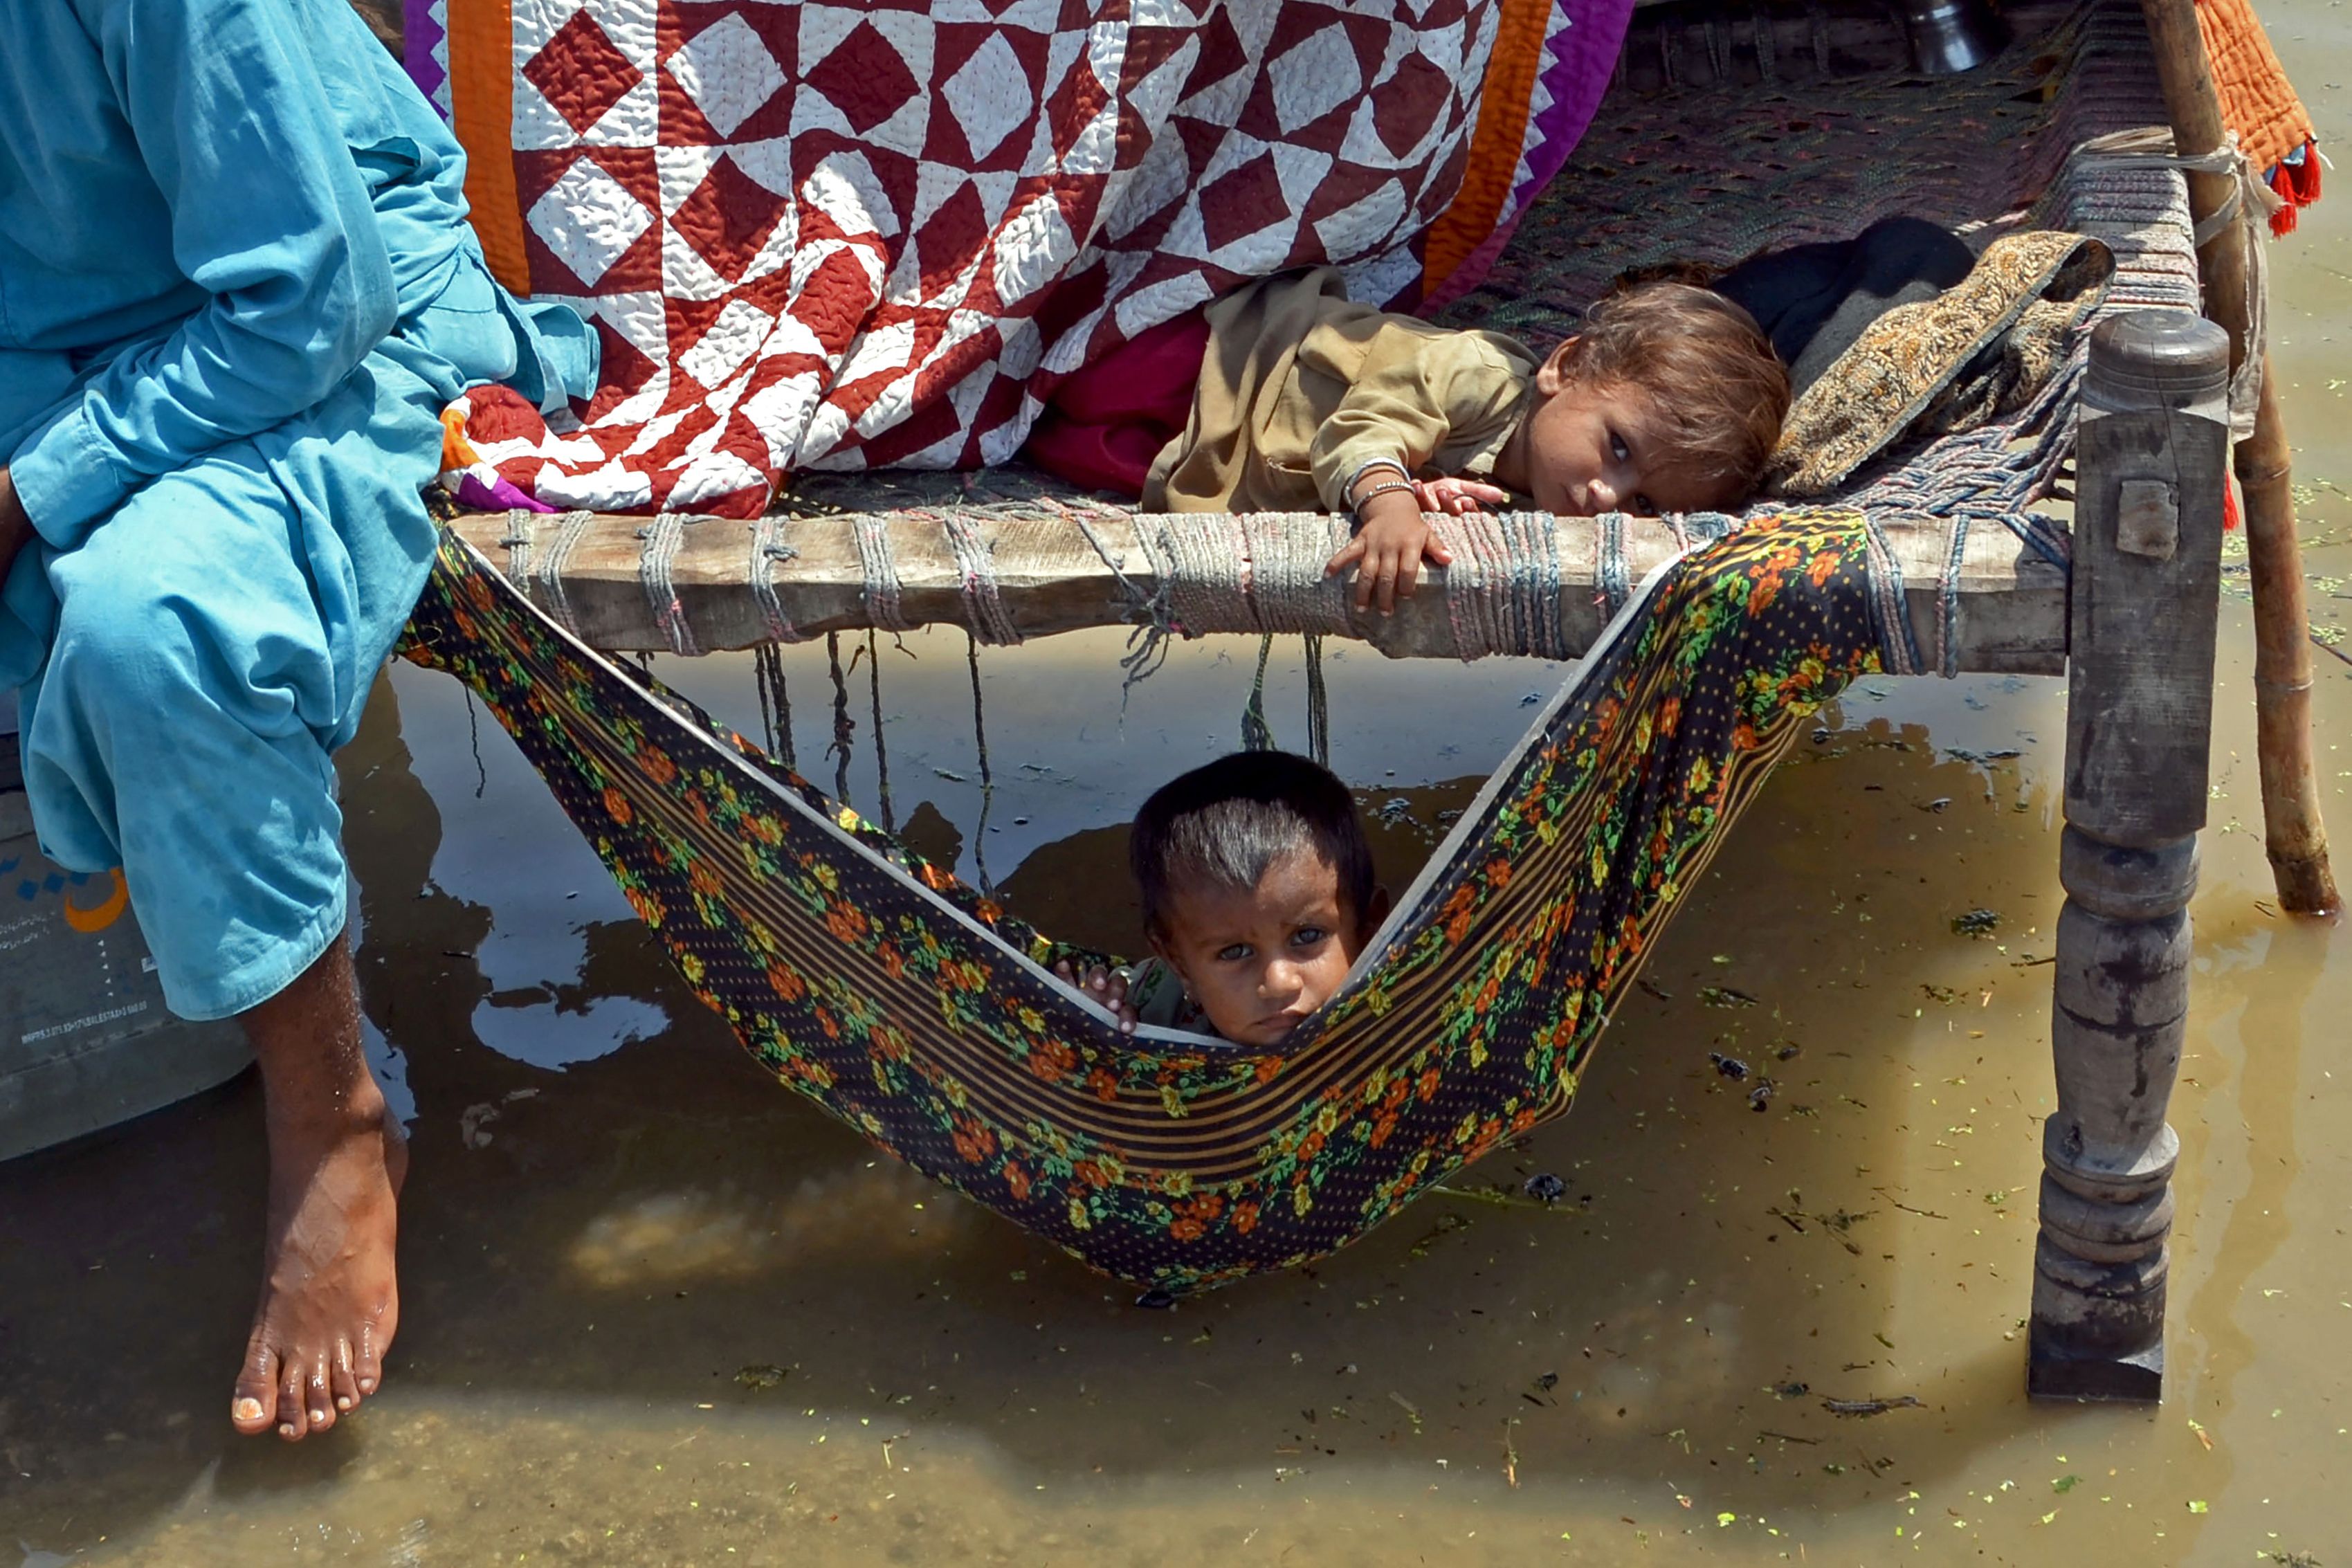 Flood-affected children sit on a traditional cot alongside flood waters after heavy monsoon rains in the Jaffarabad district of Balochistan province on 31 August